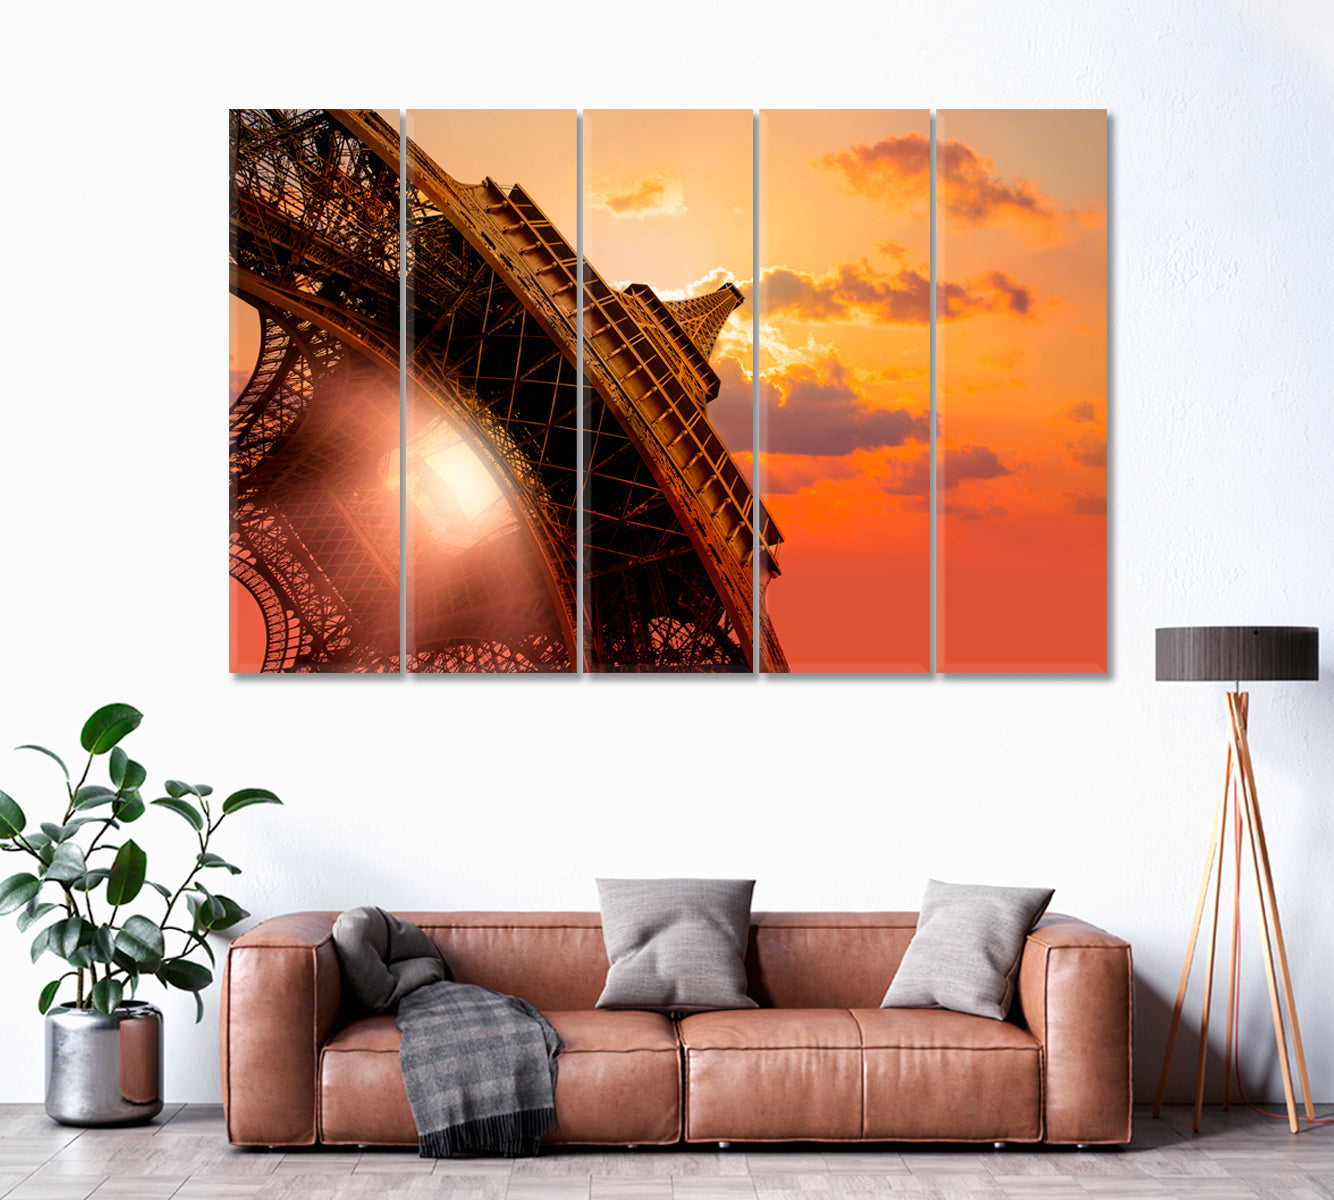 Eiffel Tower at Sunset Canvas Print ArtLexy 5 Panels 36"x24" inches 